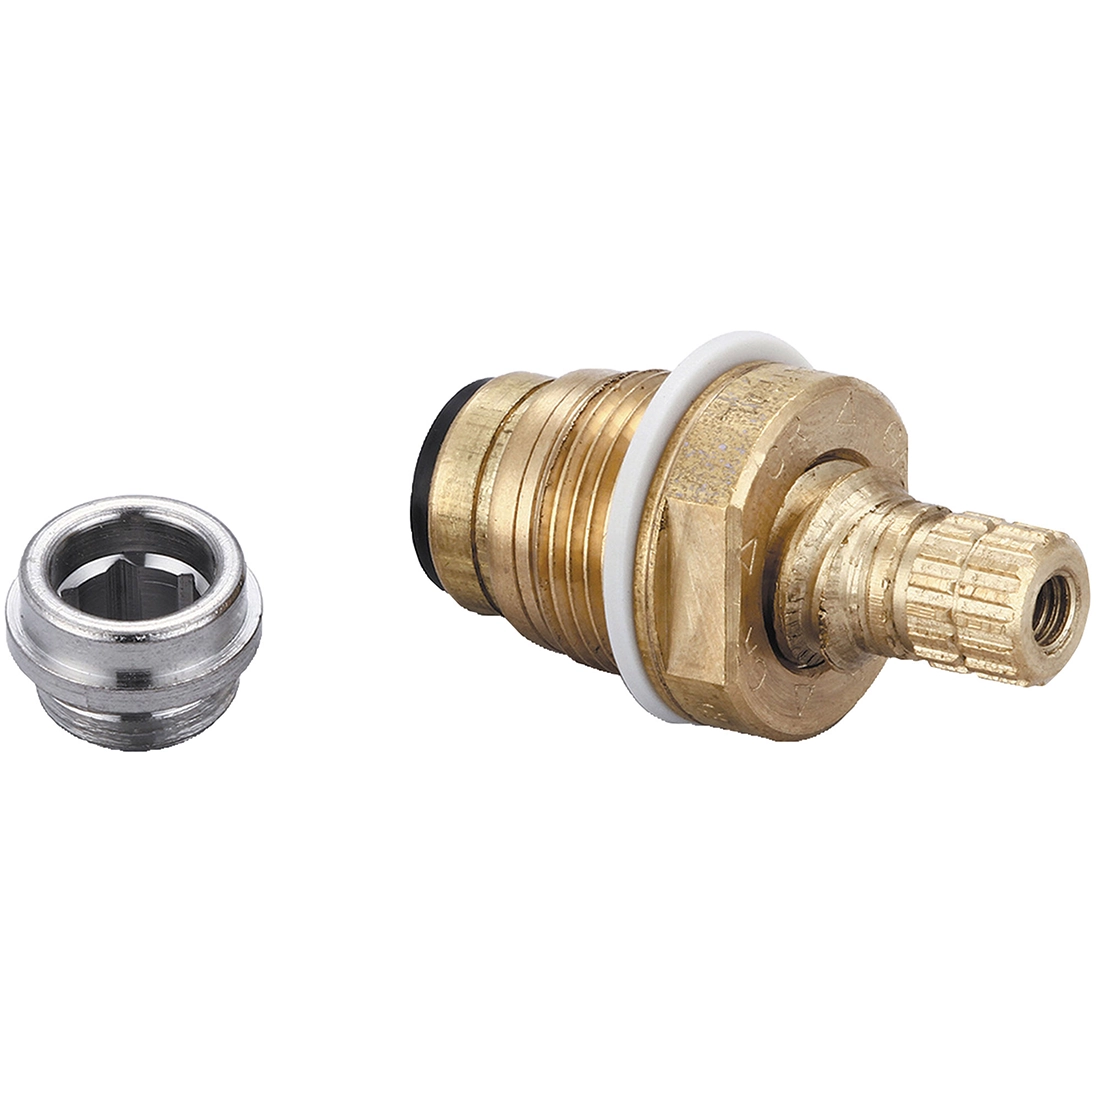 Central Brass Quick Pression 1/4 Turn Stem Assembly W/Replaceable Seat